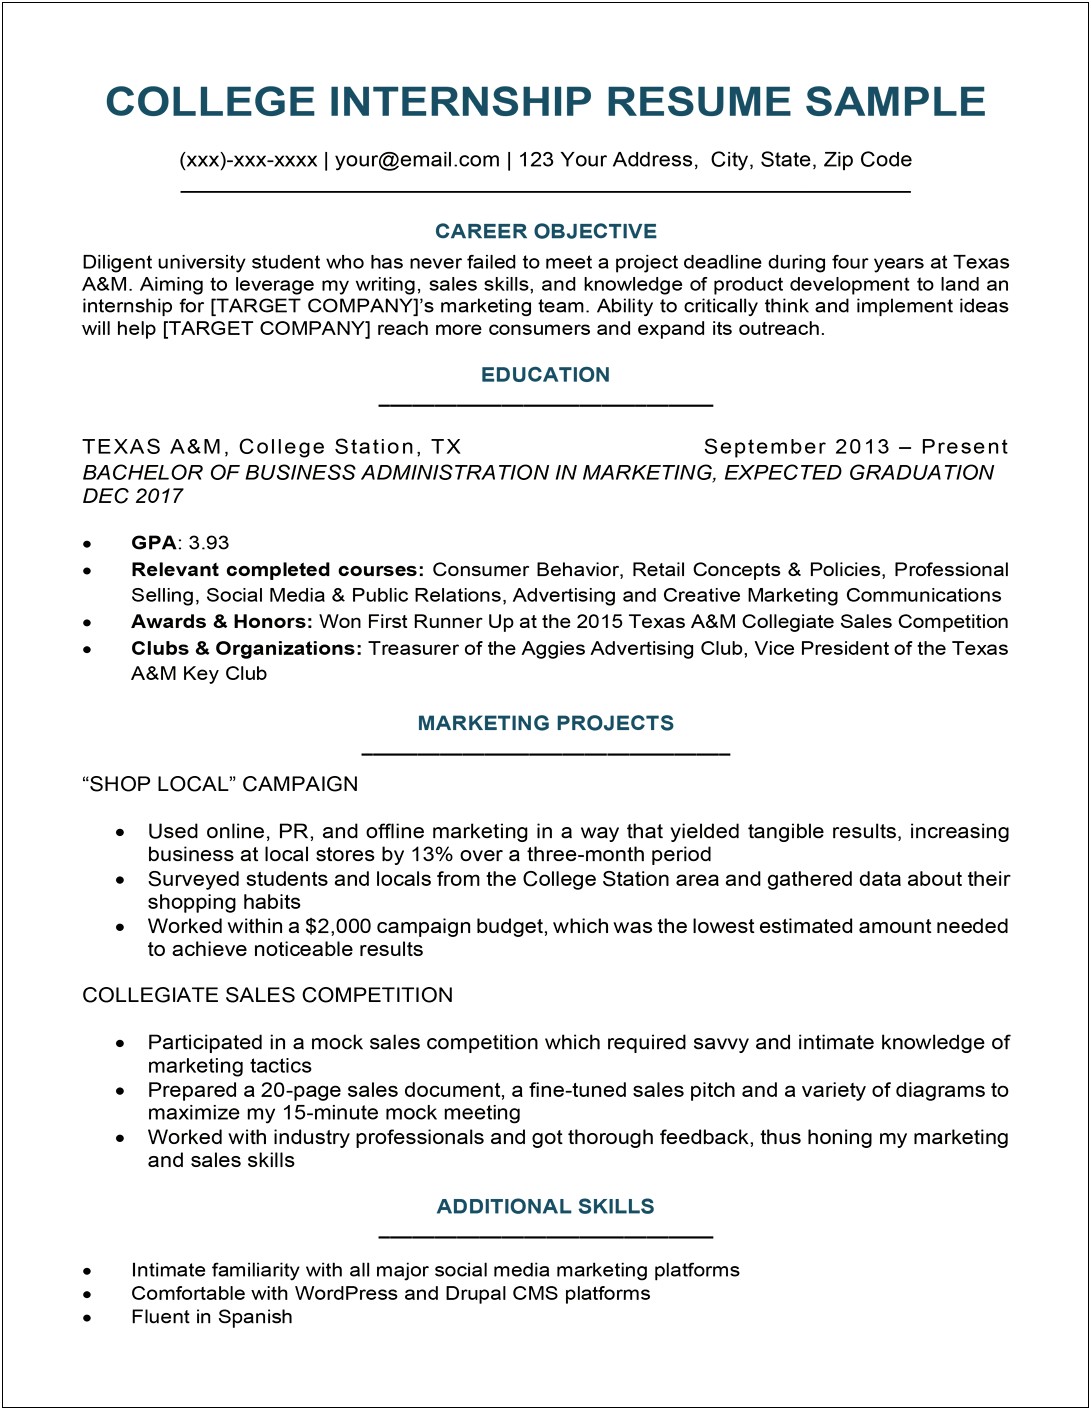 Putting Awards At Graduation In Resume